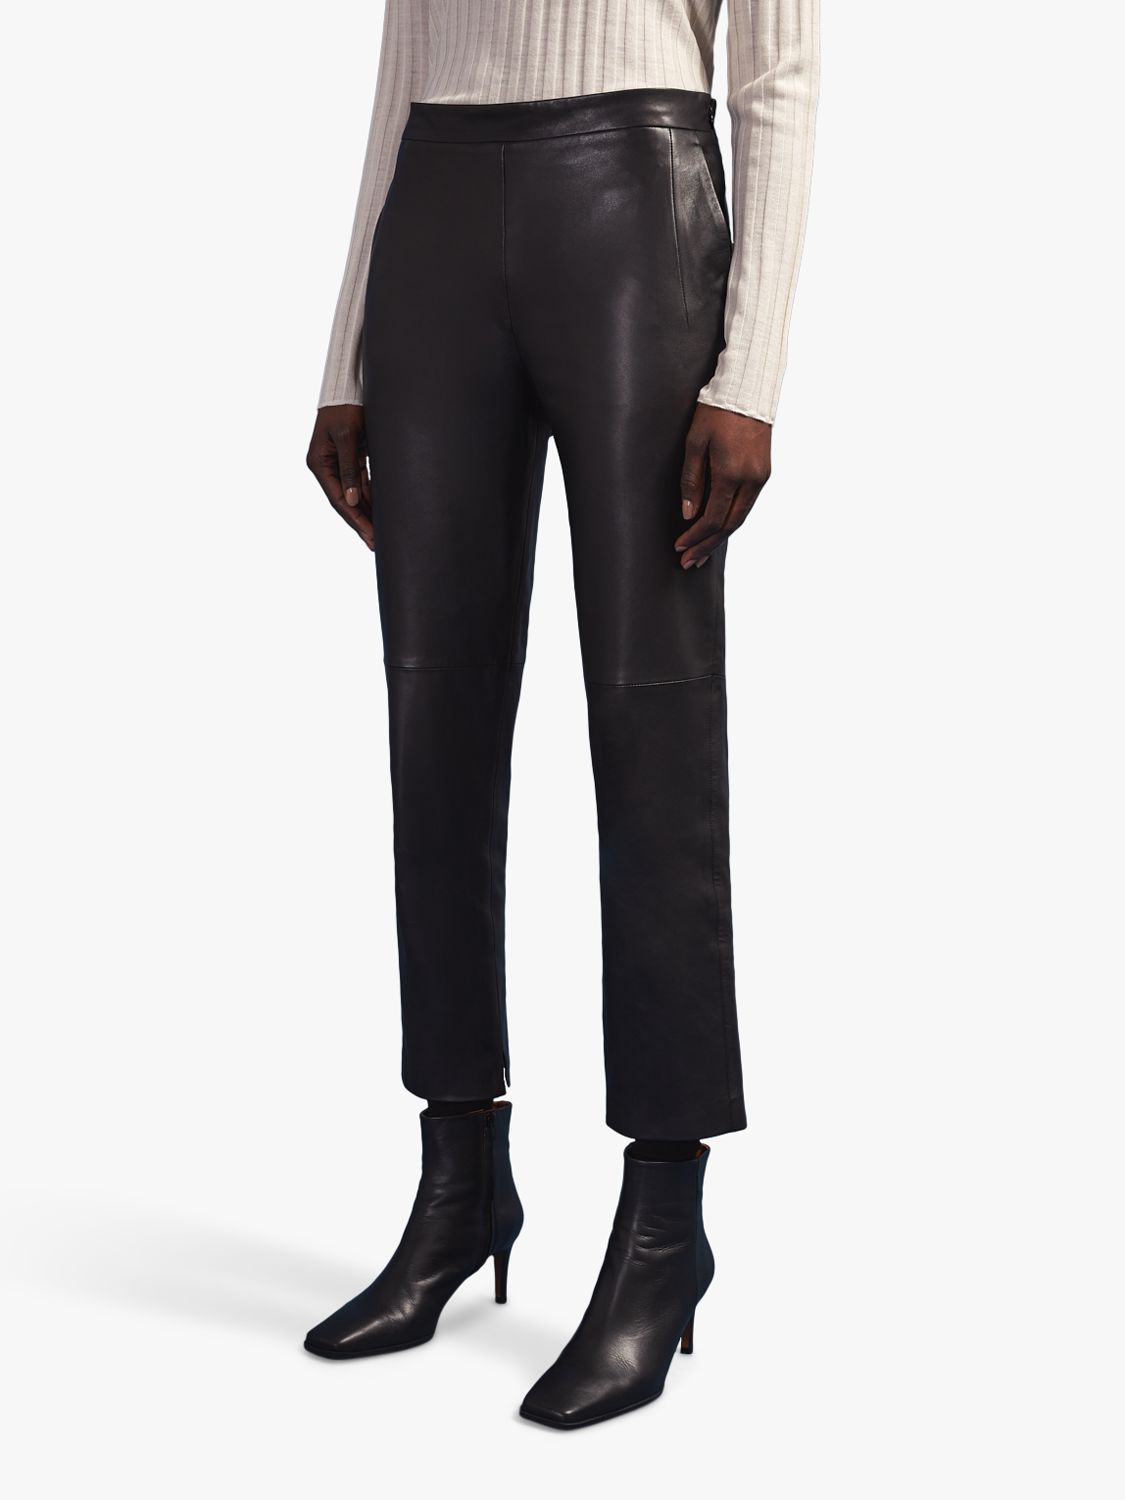 Jigsaw Leather Tailored Cropped Trousers, Black at John Lewis & Partners